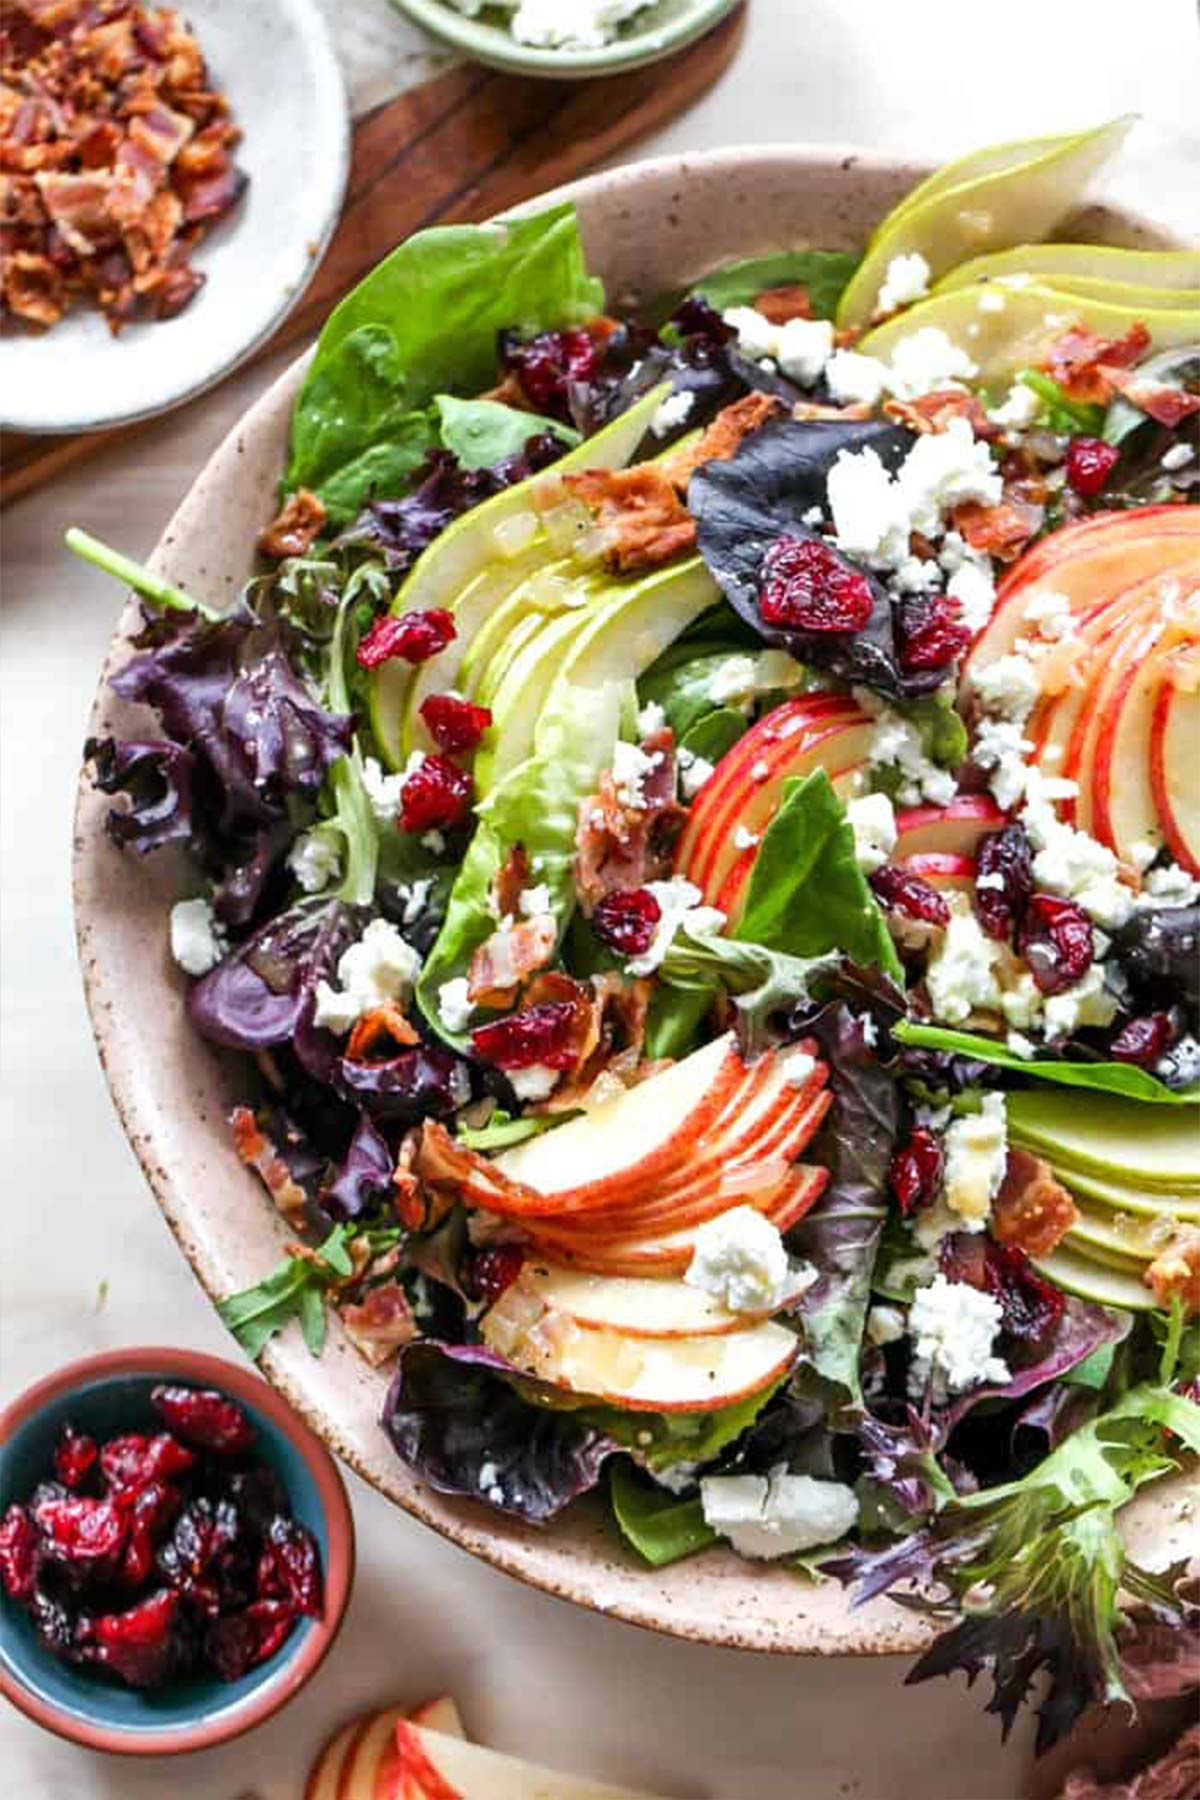 A large bowl of harvest fall salad with fresh fruit arranged in slices ready to enjoy